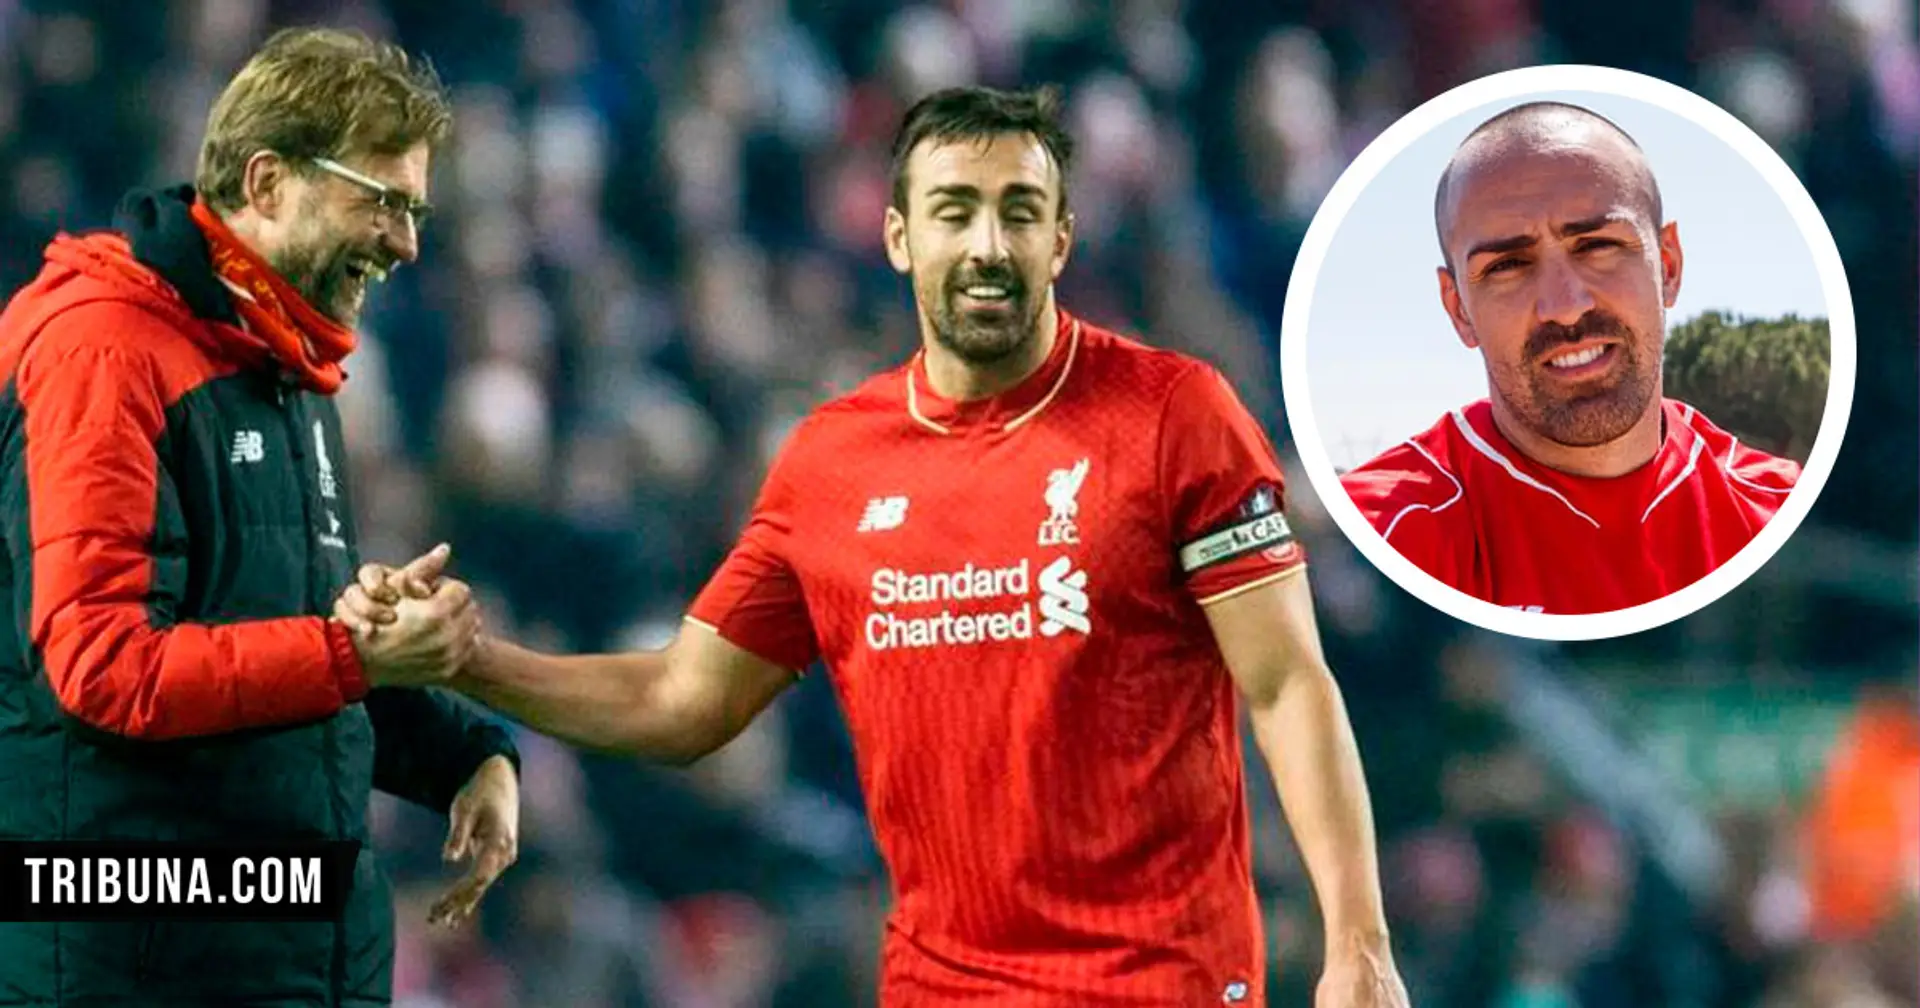 Jose Enrique: 'Klopp gave me captaincy in cup game. I still have that armband in my house!' – EXCLUSIVE